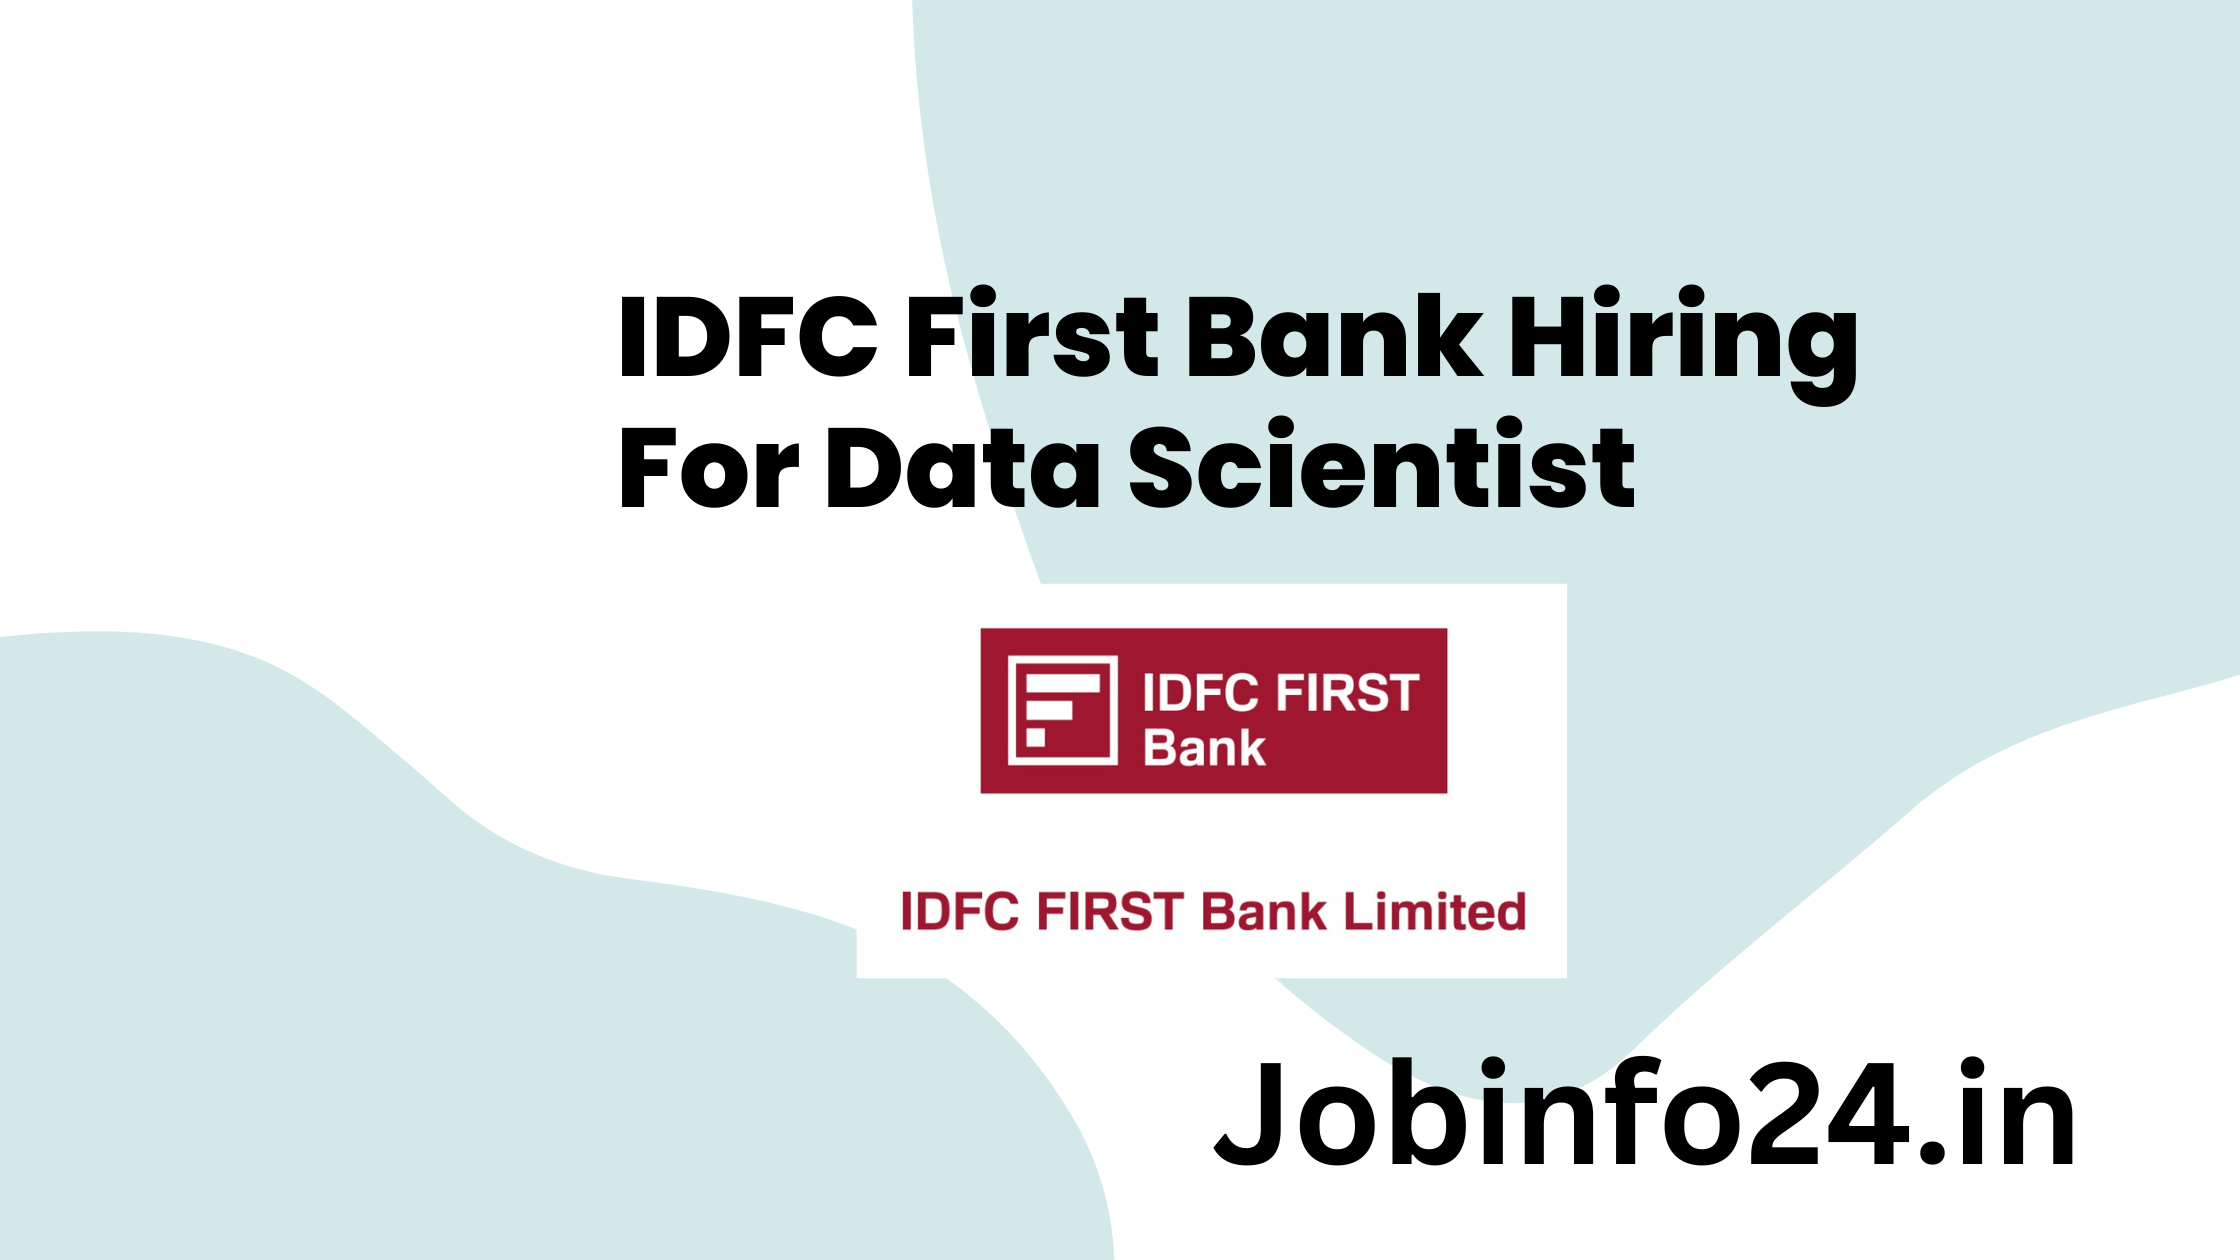 IDFC First Bank Hiring For Data Scientist 